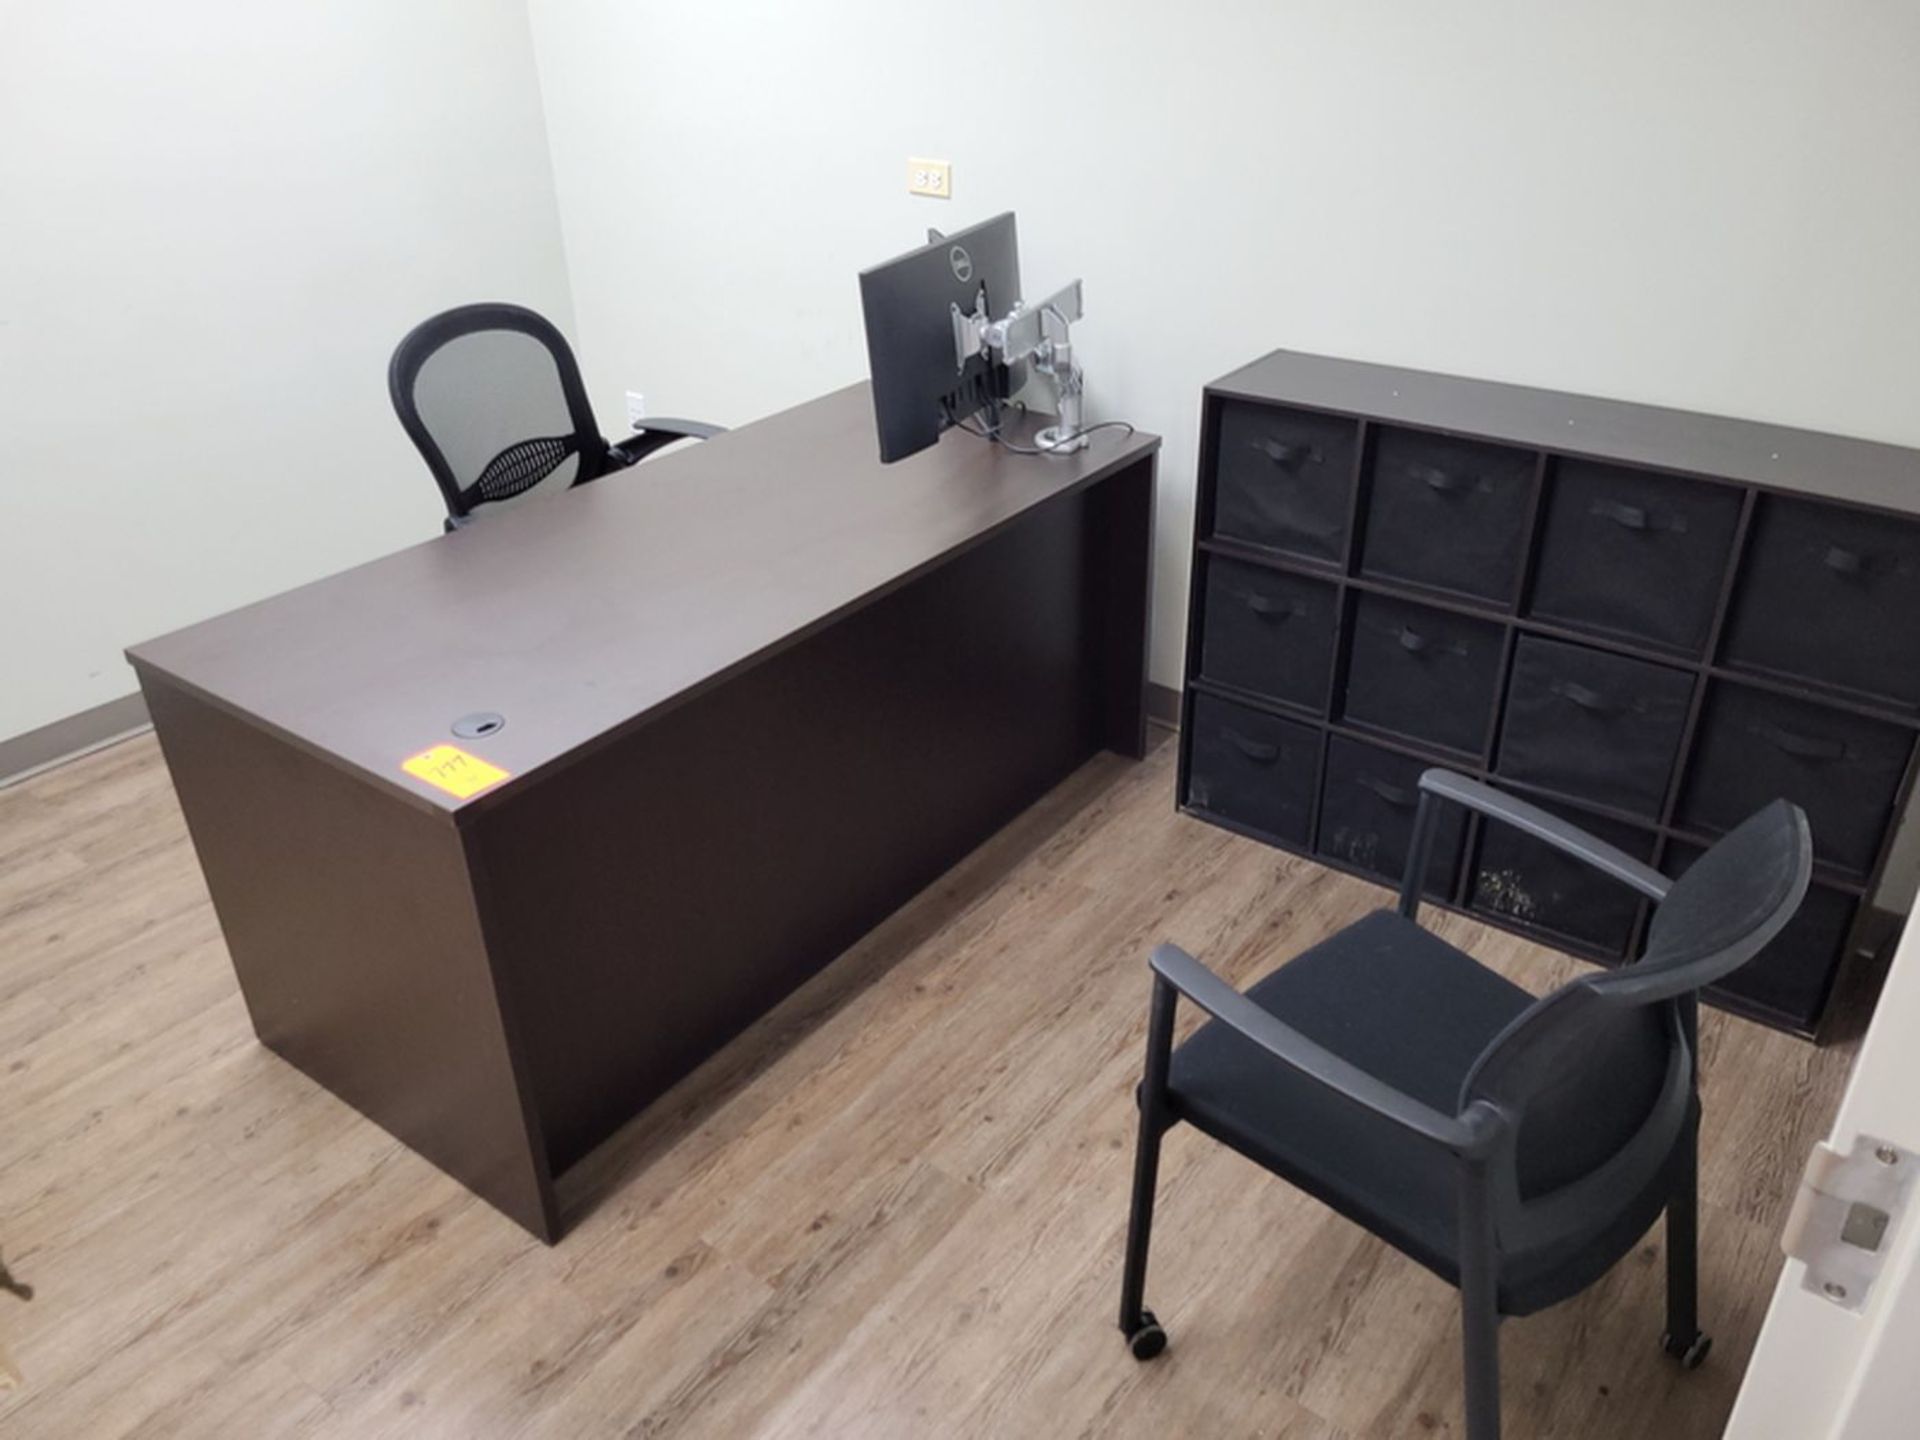 Lot - Office Furnishings; to Include: (1) Desk, (1) Swivel Chair, (1) Side Chair, and (1) Storage - Image 2 of 2